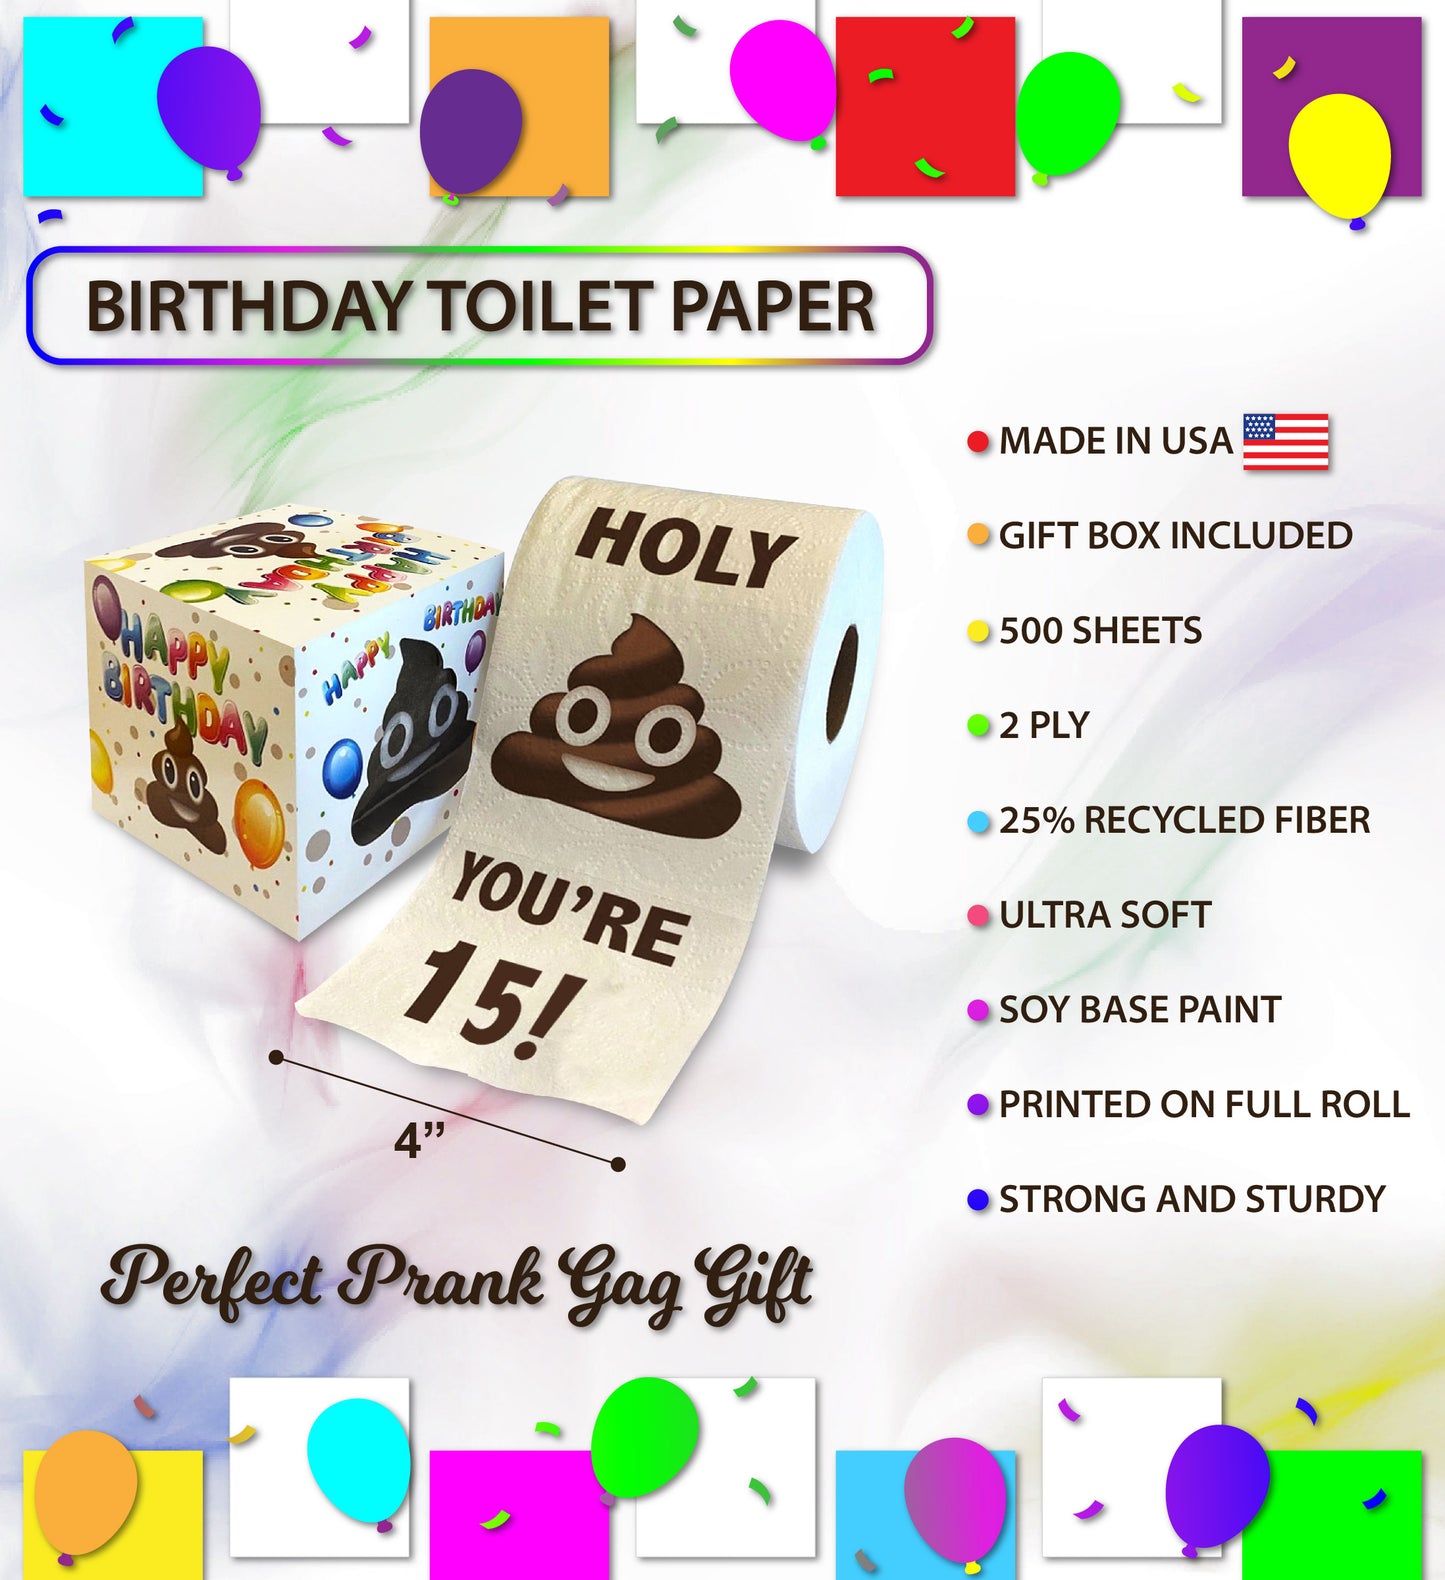 Printed TP Holy Poop You're 15 Printed Toilet Paper Funny Gag Gift – 500 Sheets